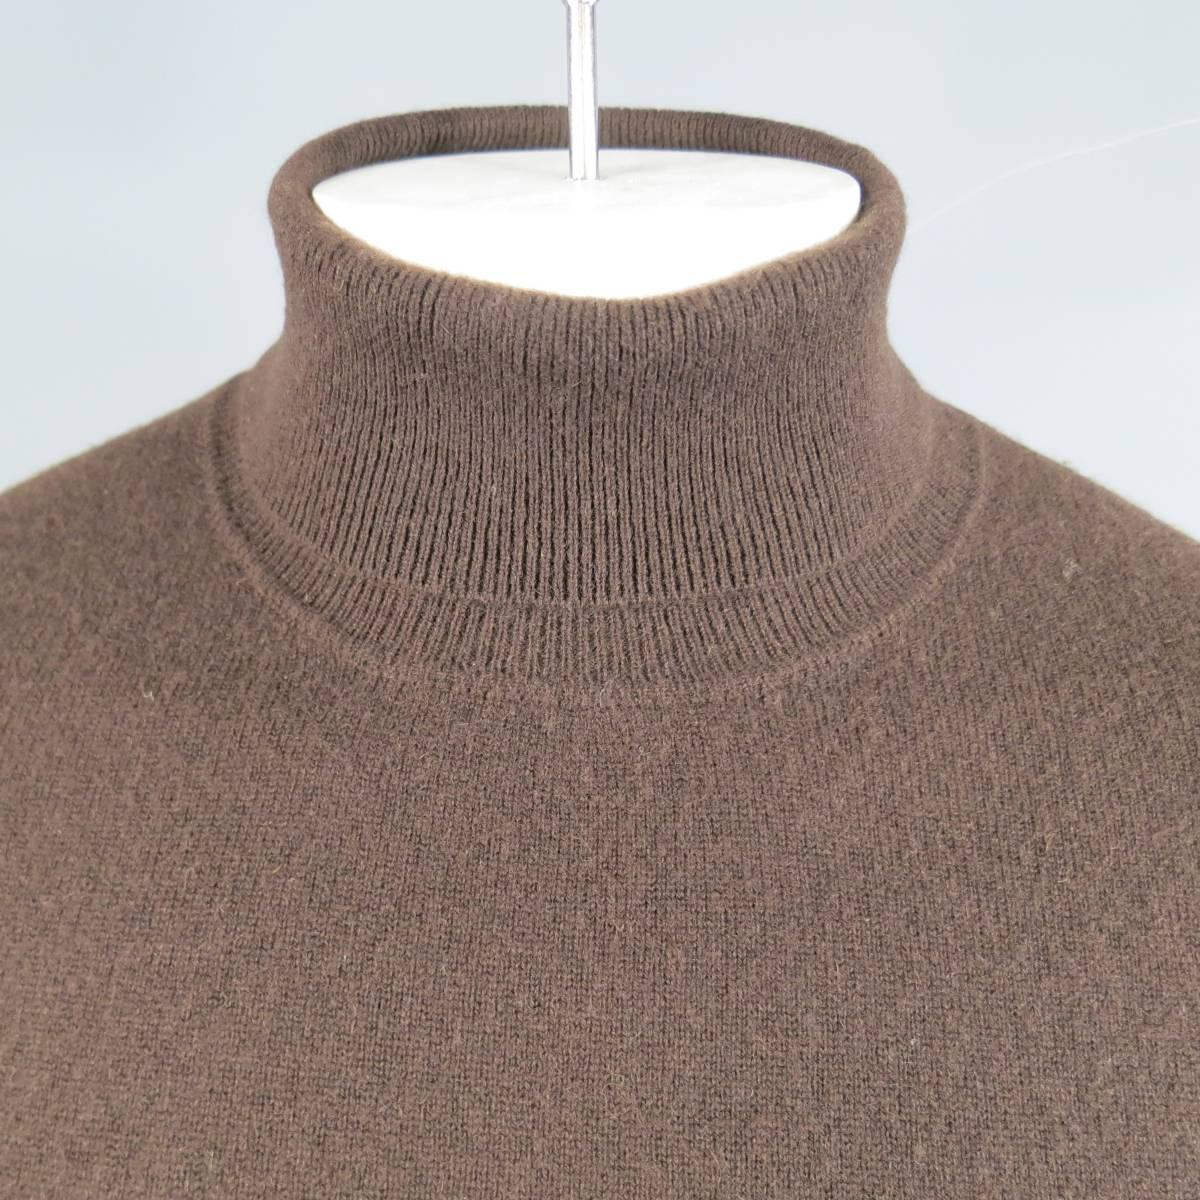 Classic RALPH LAUREN PURPLE LABEL cuffed turtleneck pullover sweater in light weight rich chocolate brown cashmere knit. Made in Italy.
 
Excellent Pre-Owned Condition.
Marked: XL
 
Measurements:
 
Shoulder: 20 in.
Chest: 50 in.
Sleeve: 25